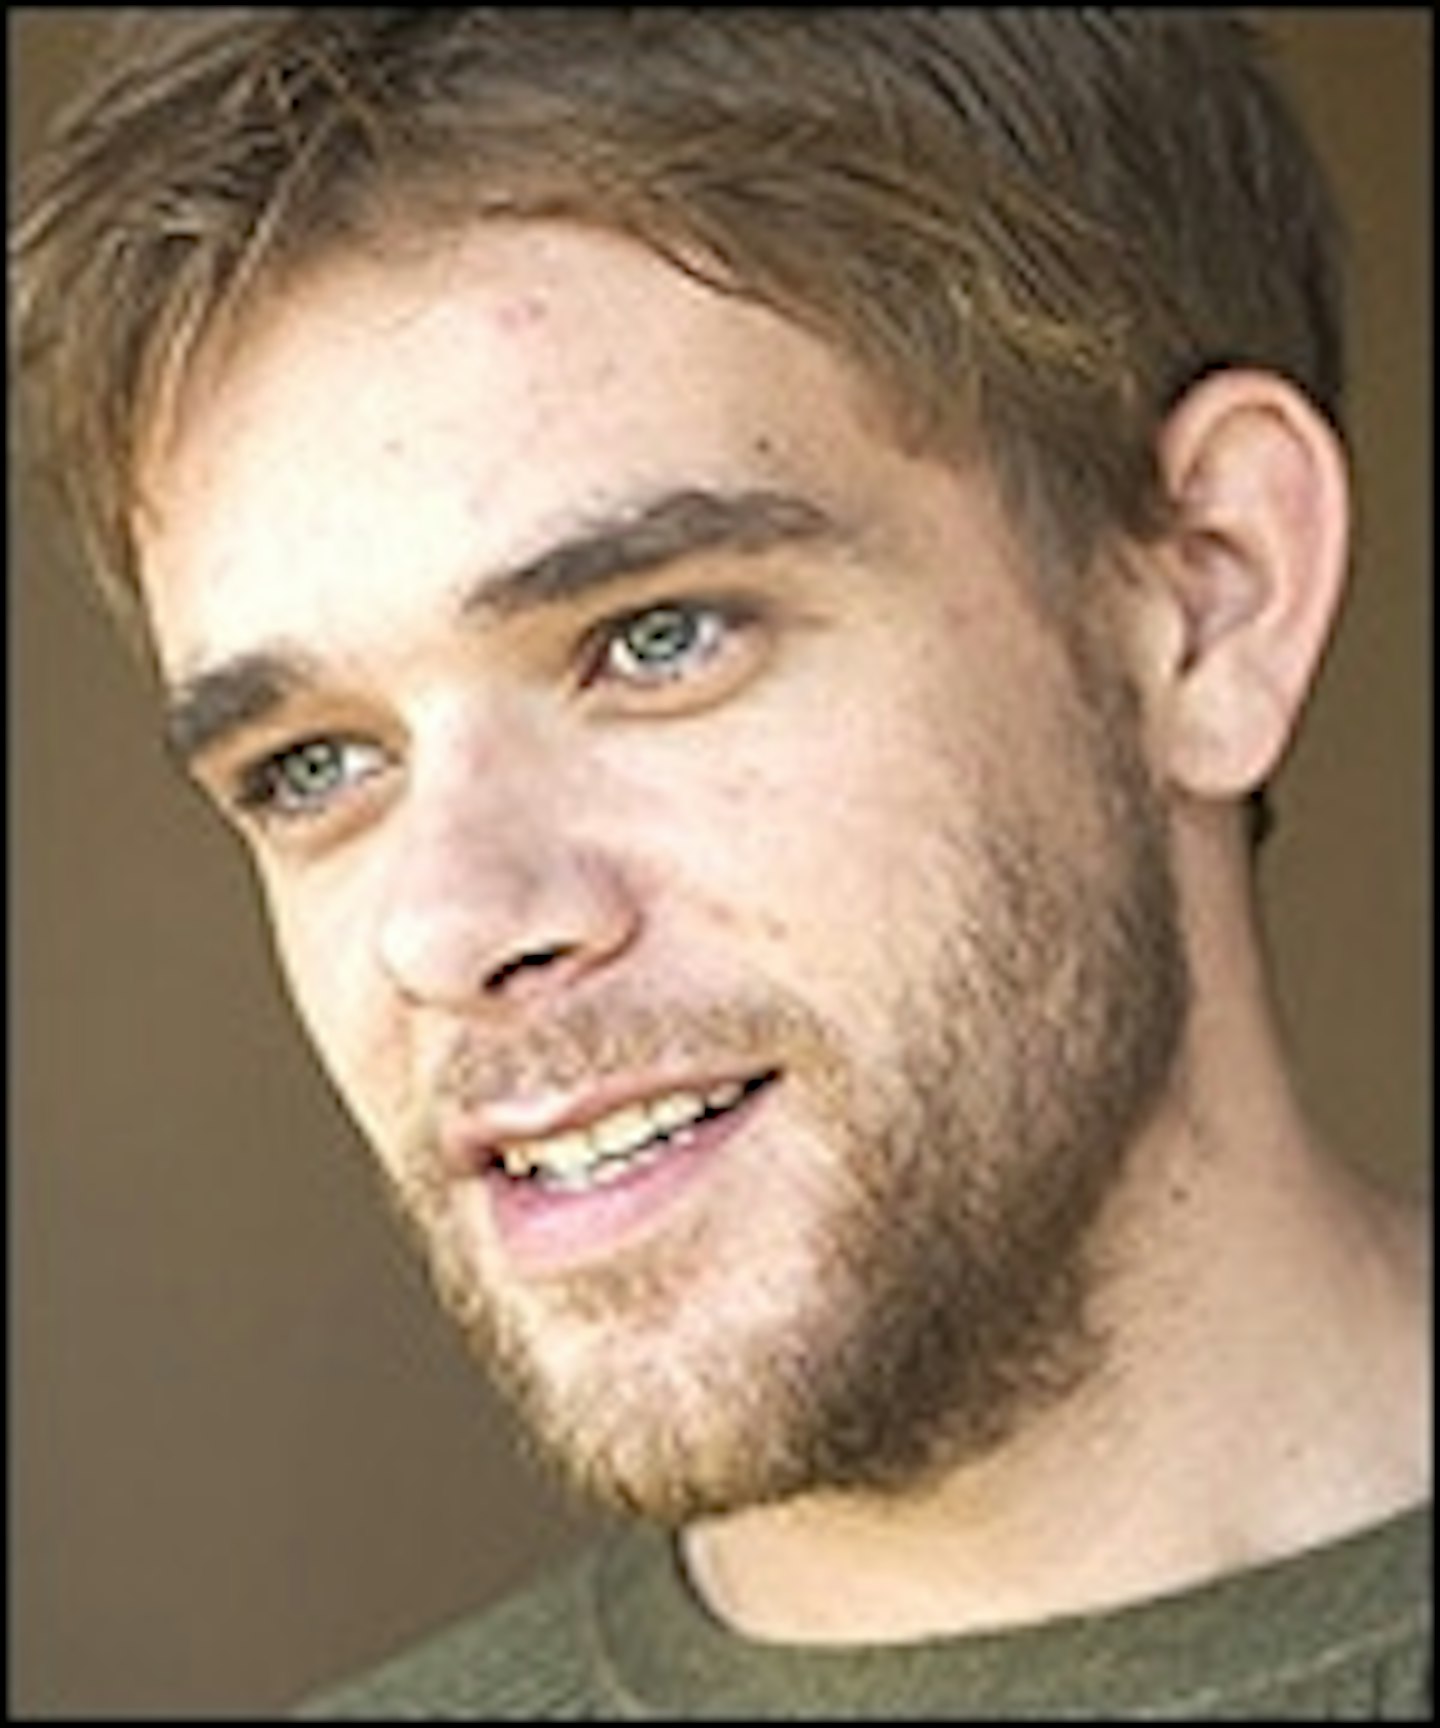 Heist Stakes For Nick Stahl